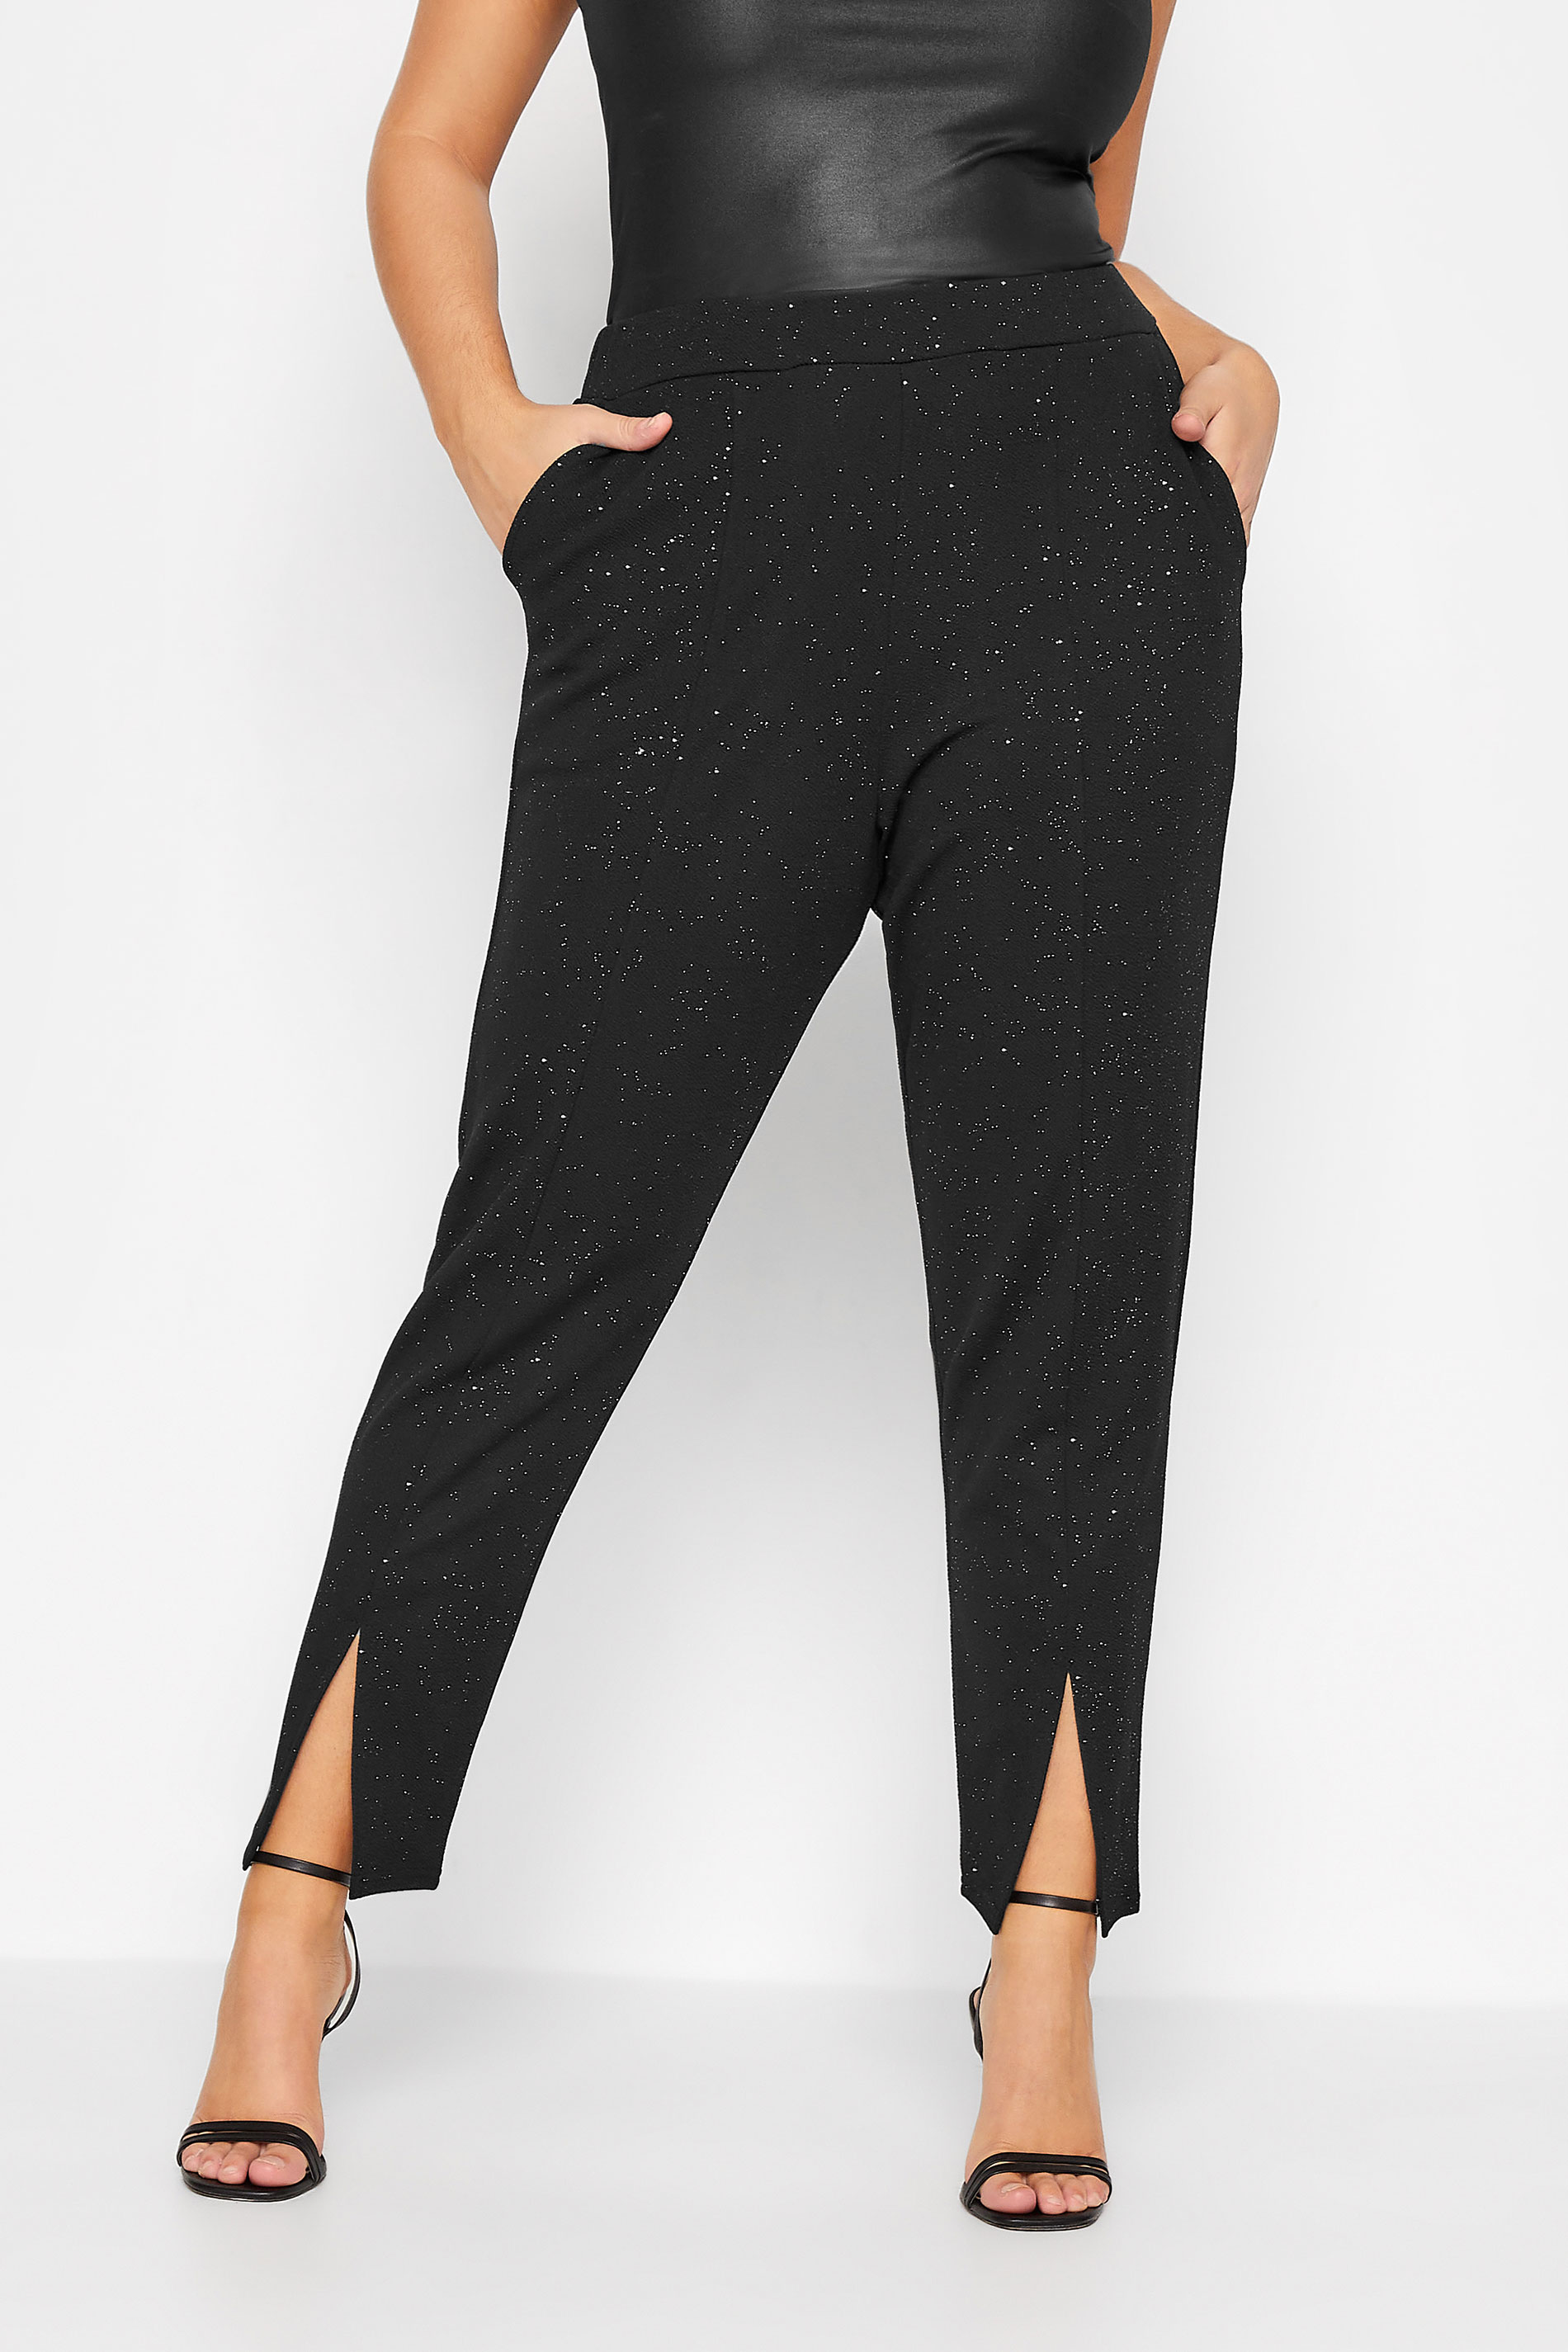 LIMITED COLLECTION Plus Size Black Glitter Split Hem Tapered Trousers | Yours Clothing 1